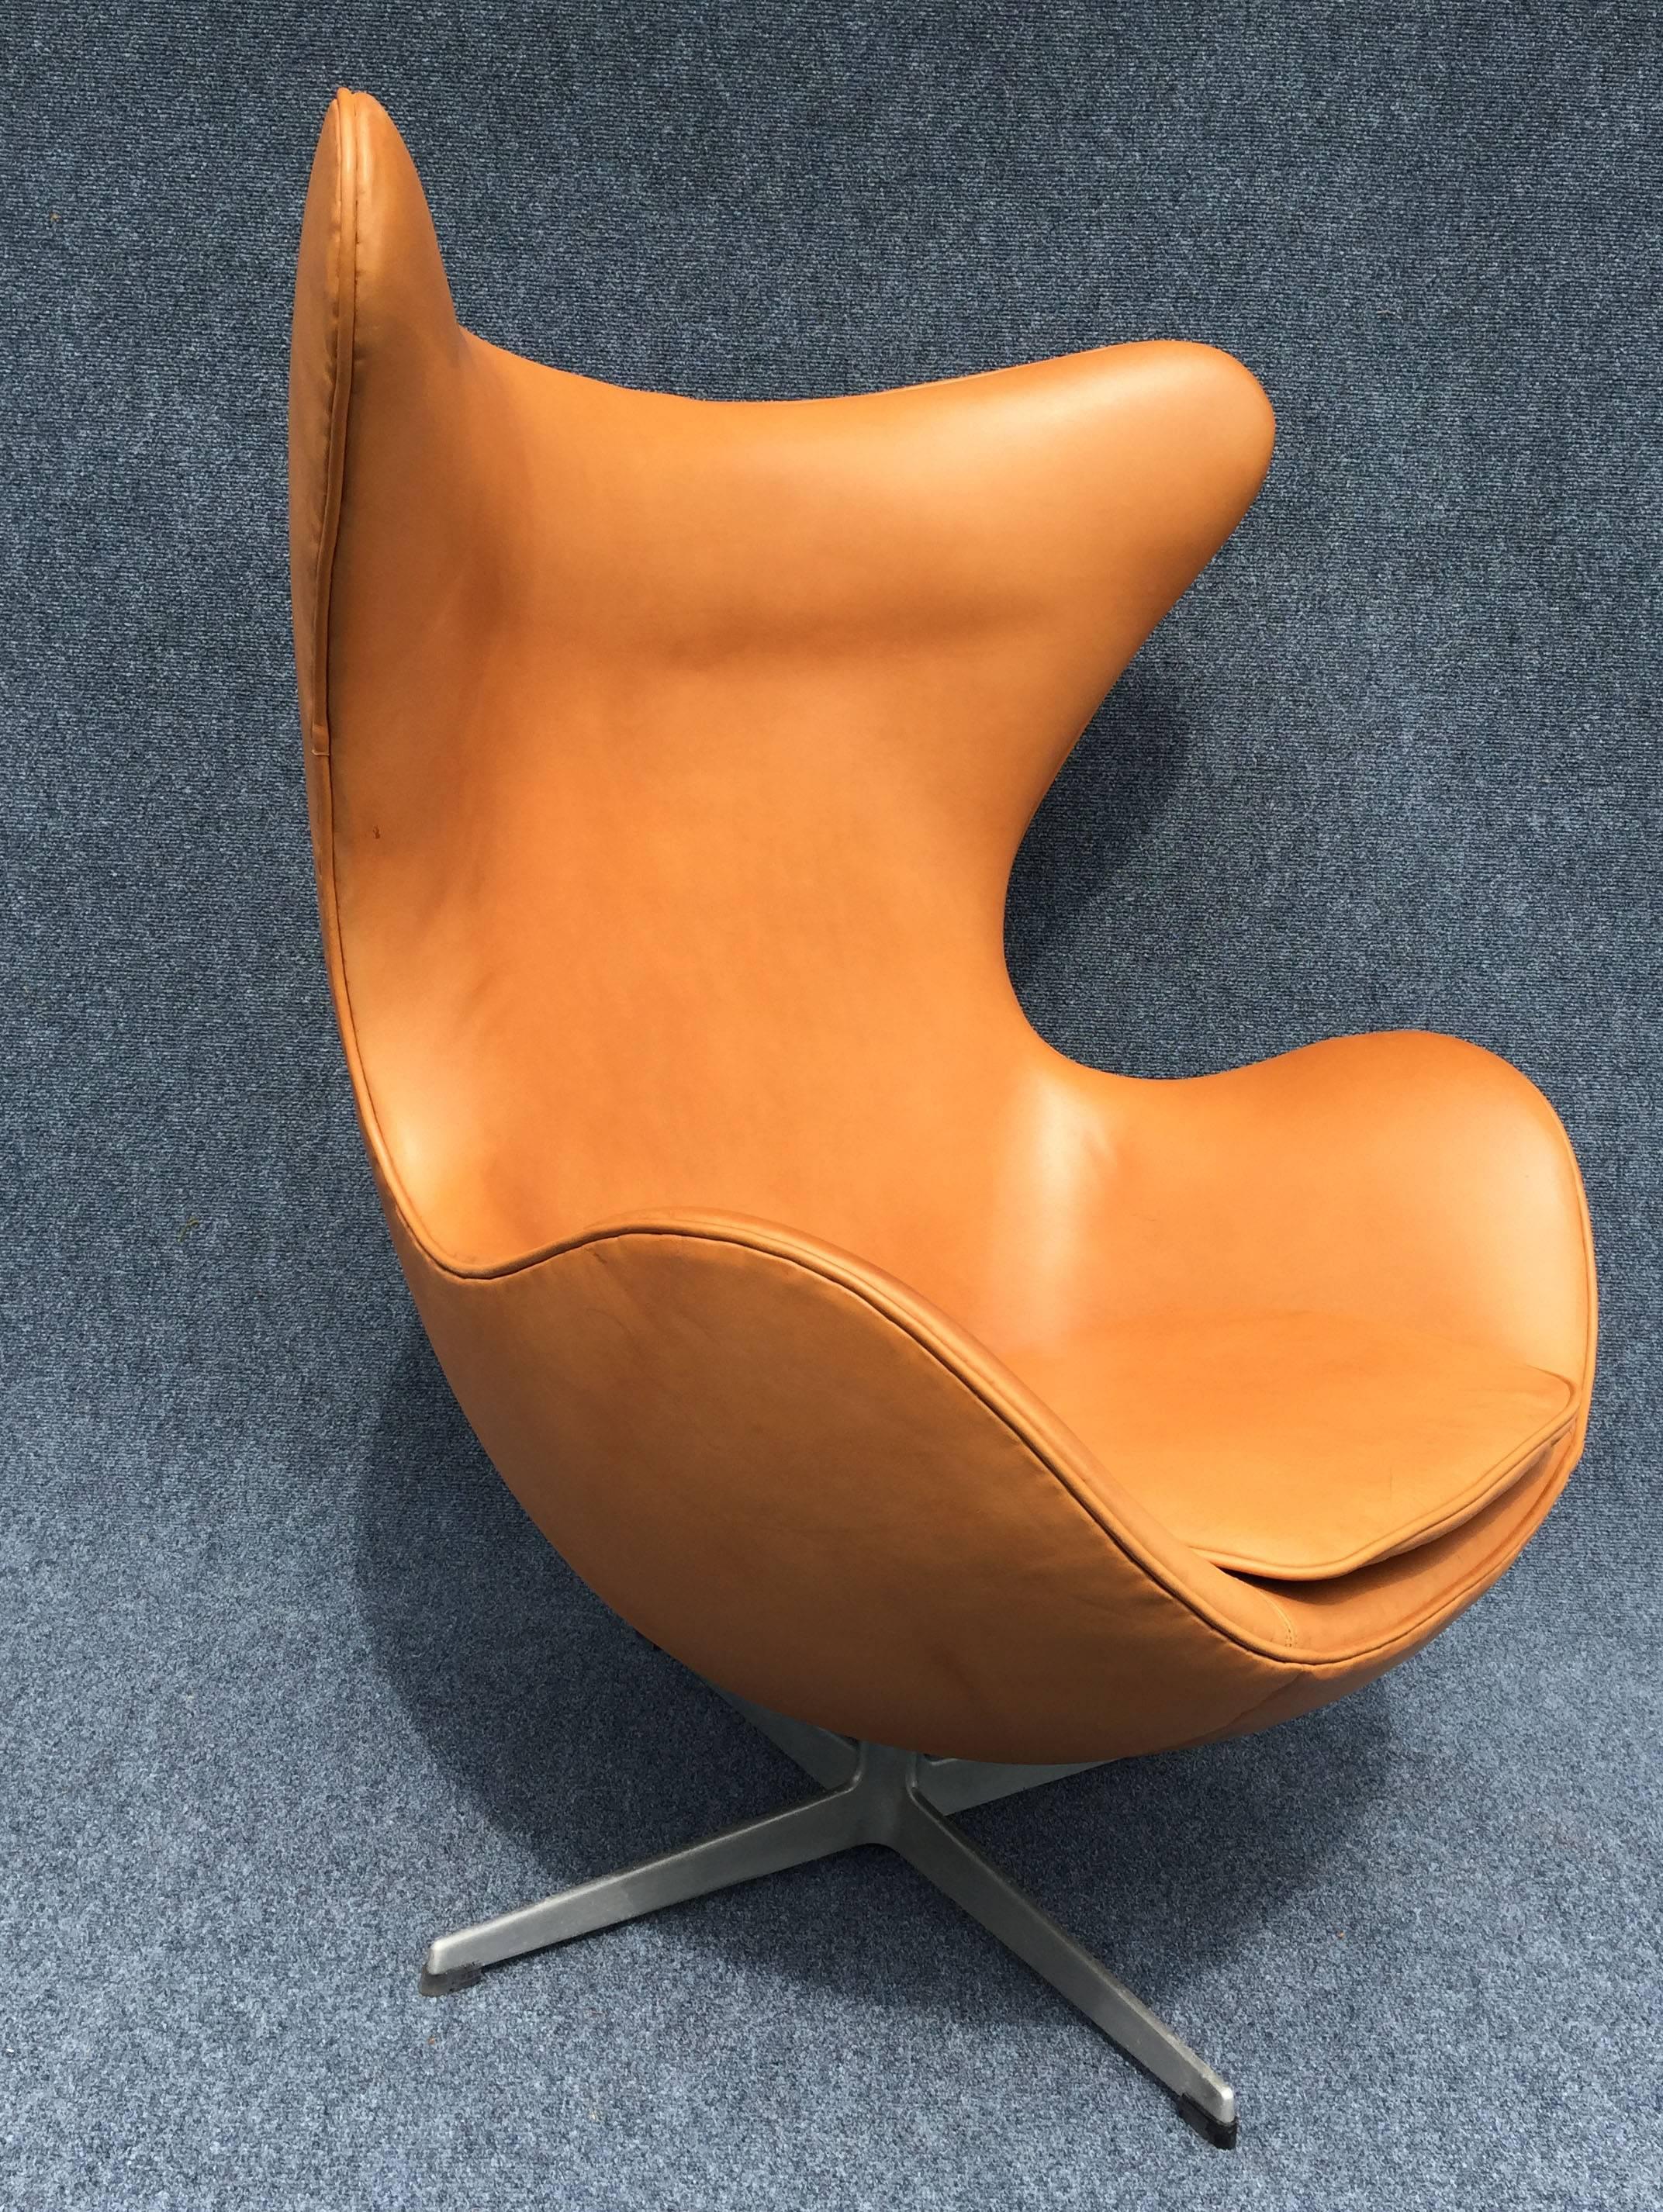 Mid-20th Century Cognac Leather Egg Chair by Arne Jacobsen for Fritz Hansen